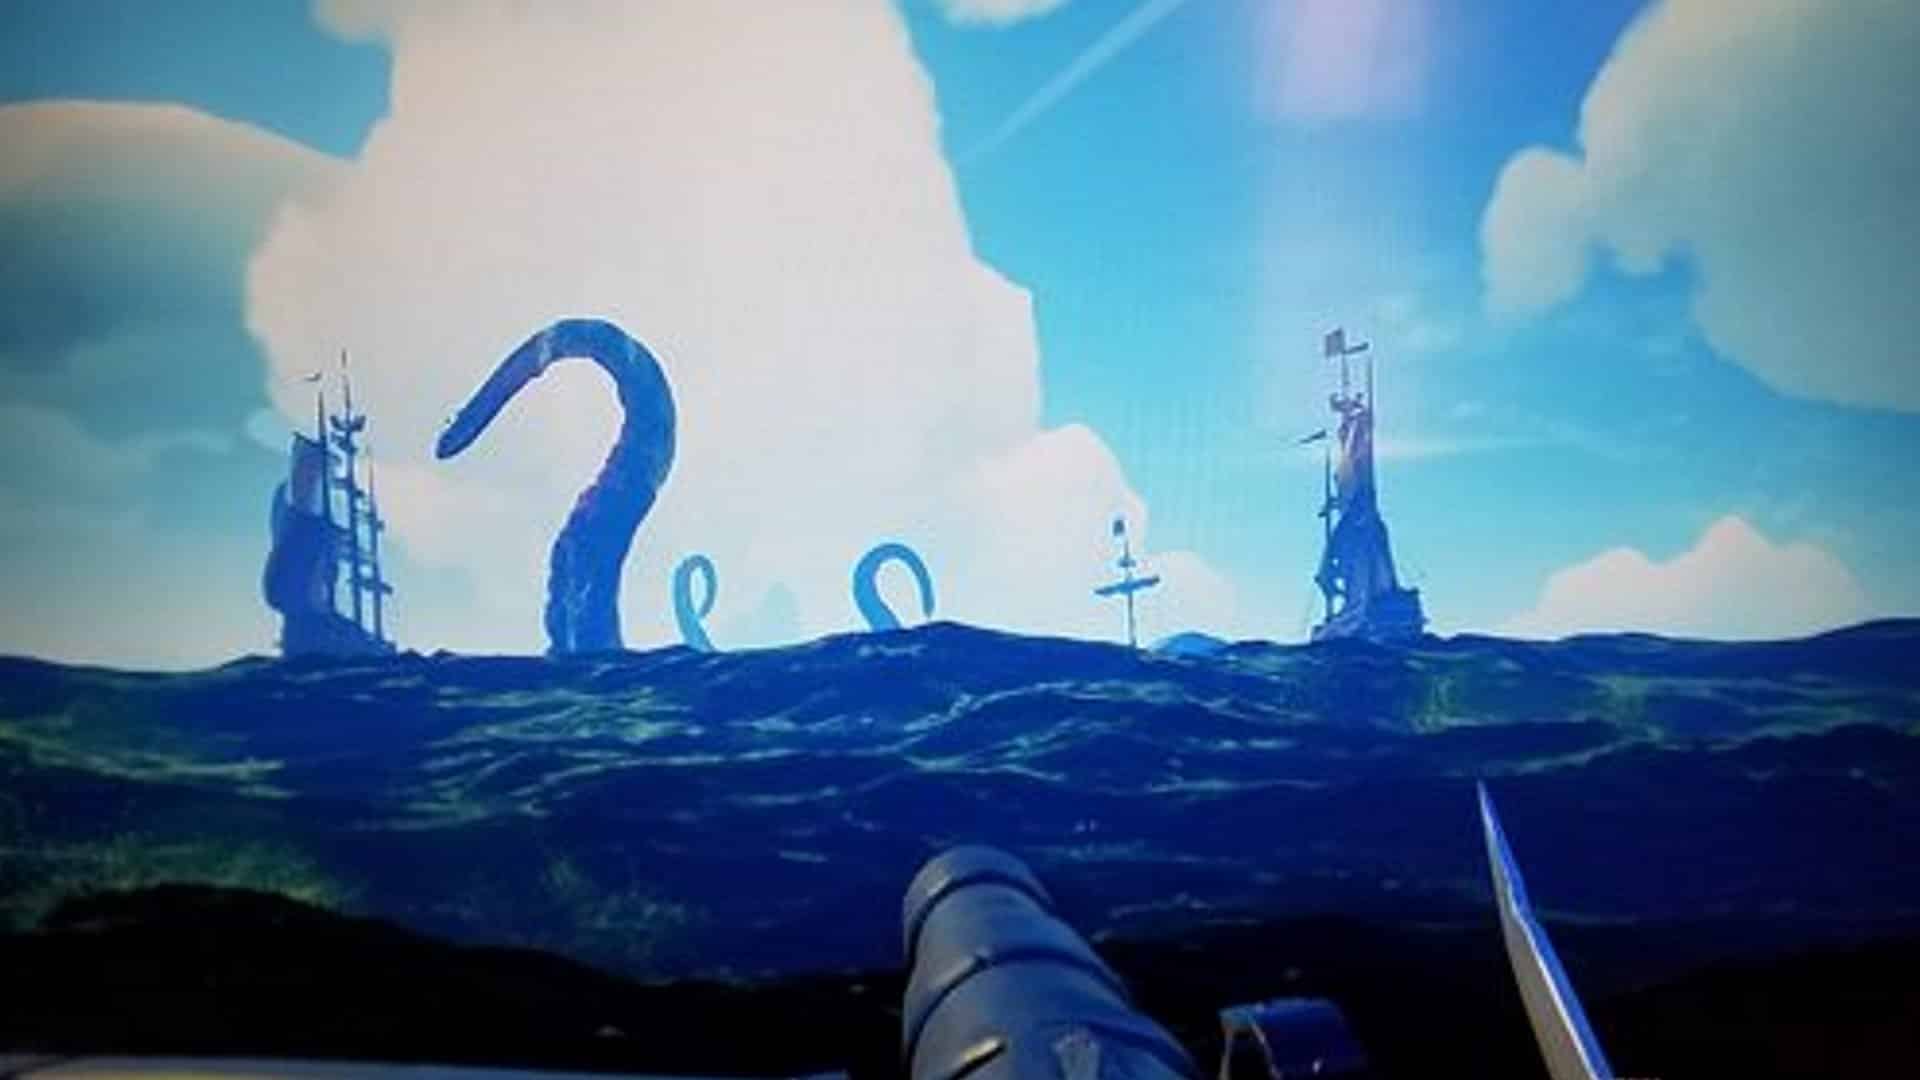 sea of thieves kraken attacks a ship wile two others sail by